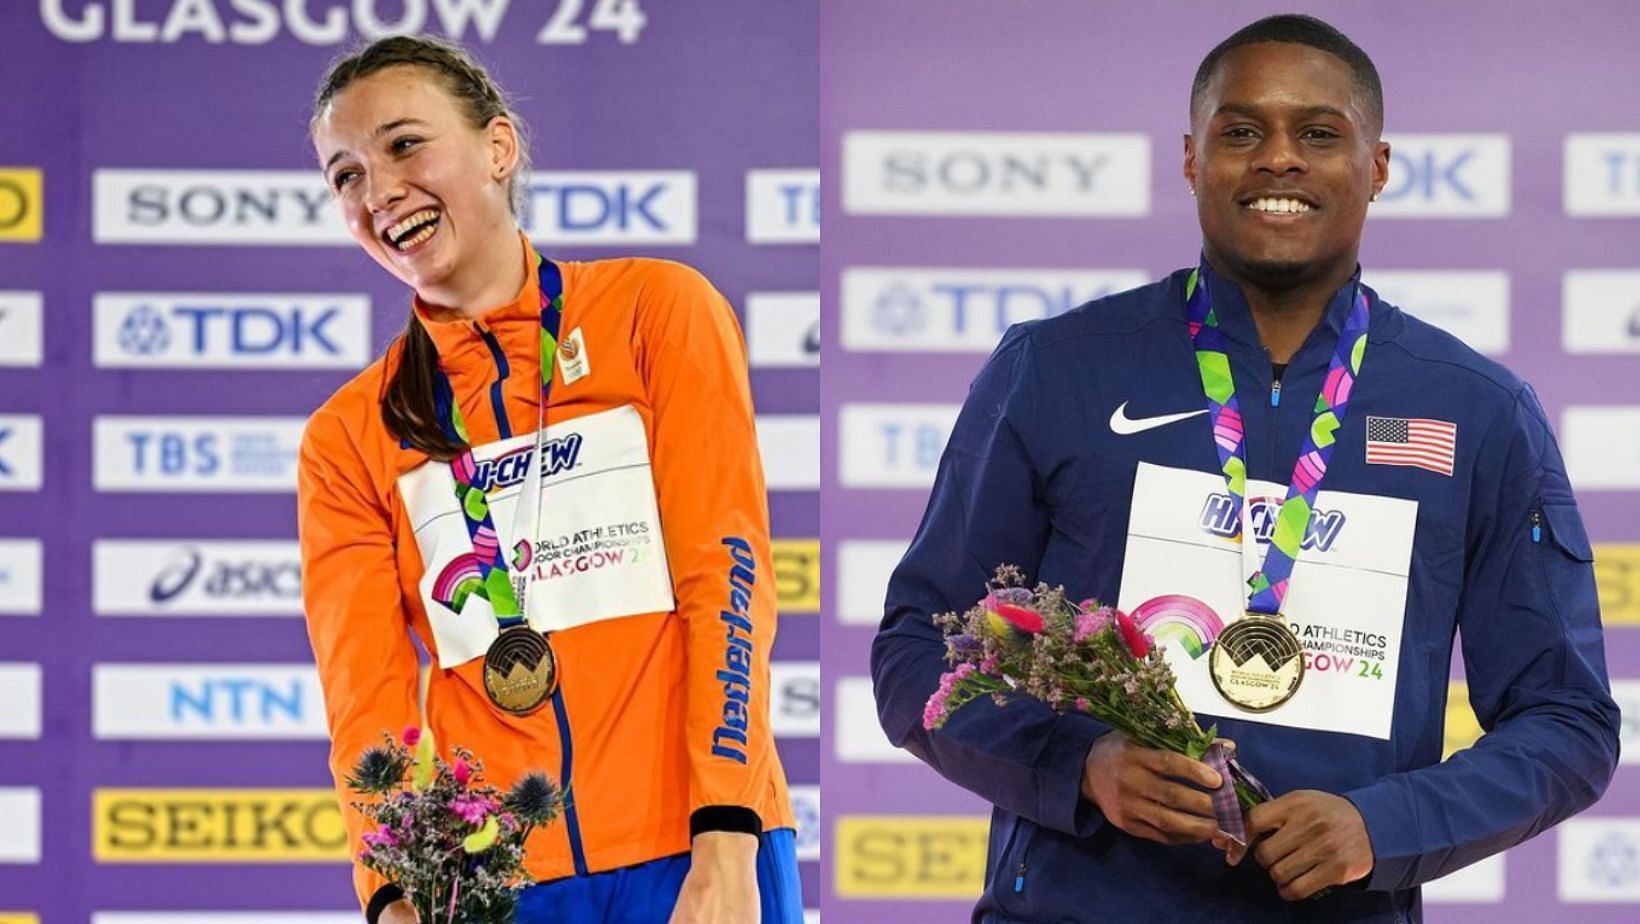 Who were the top earners of the World Indoor Championships 